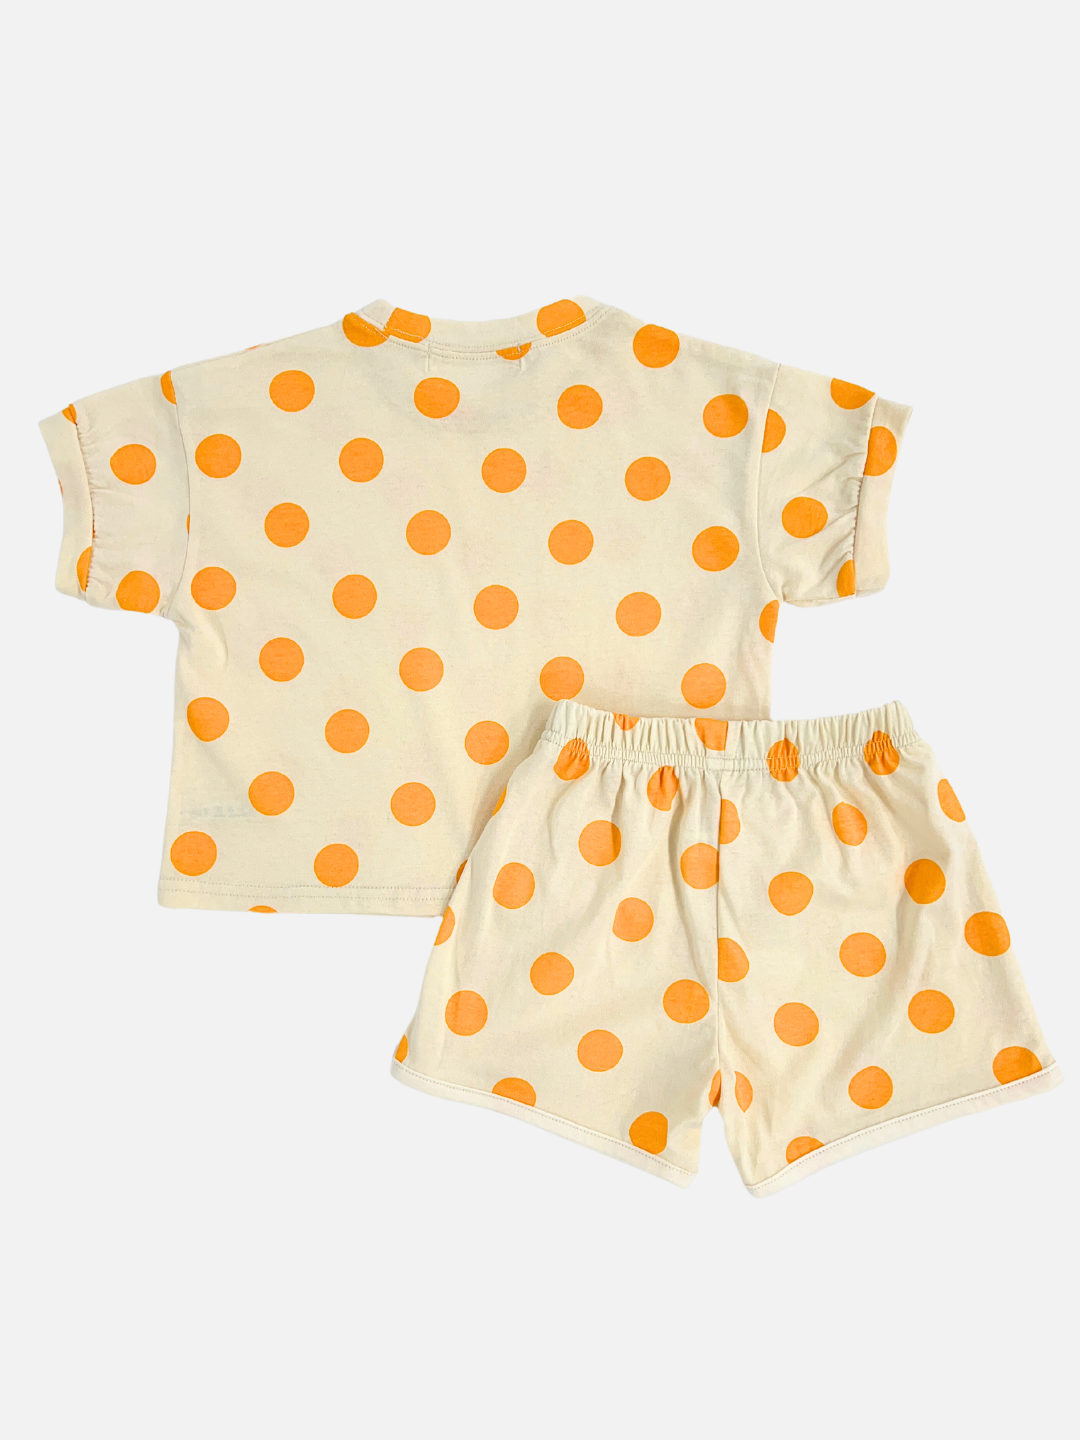 A kids' tee shirt and shorts set in a pattern of orange dots on an ecru background, back view